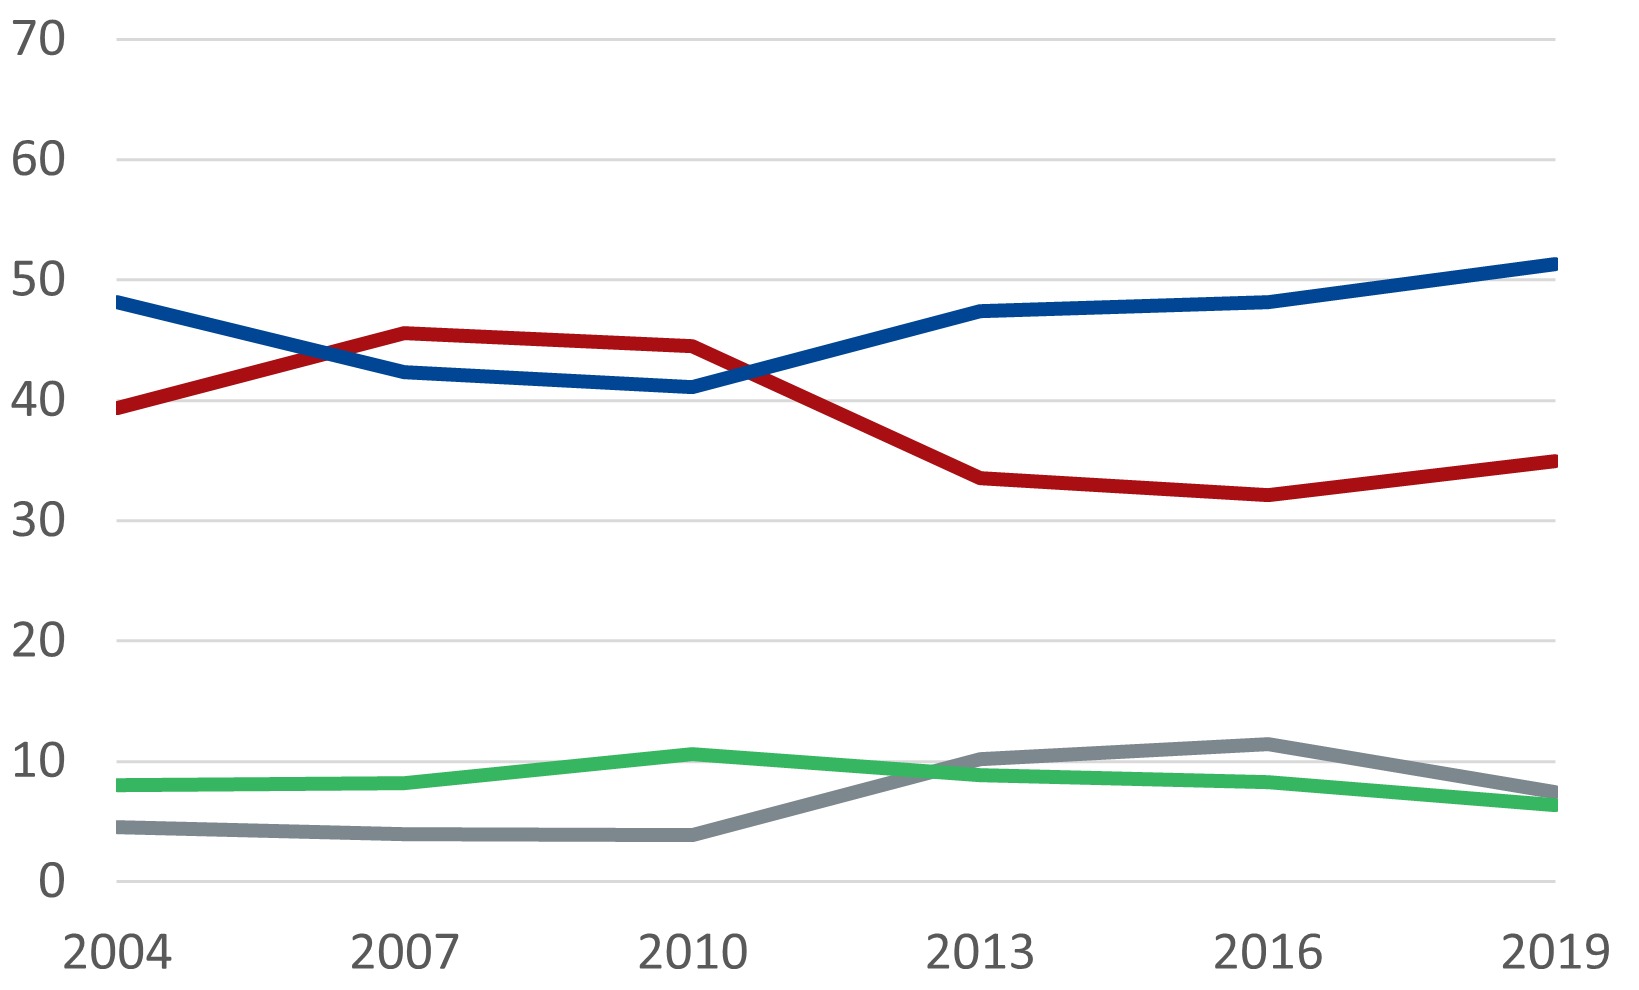 Graph of Baby Boomers, first preference percentage by party, elections 2004 to 2019